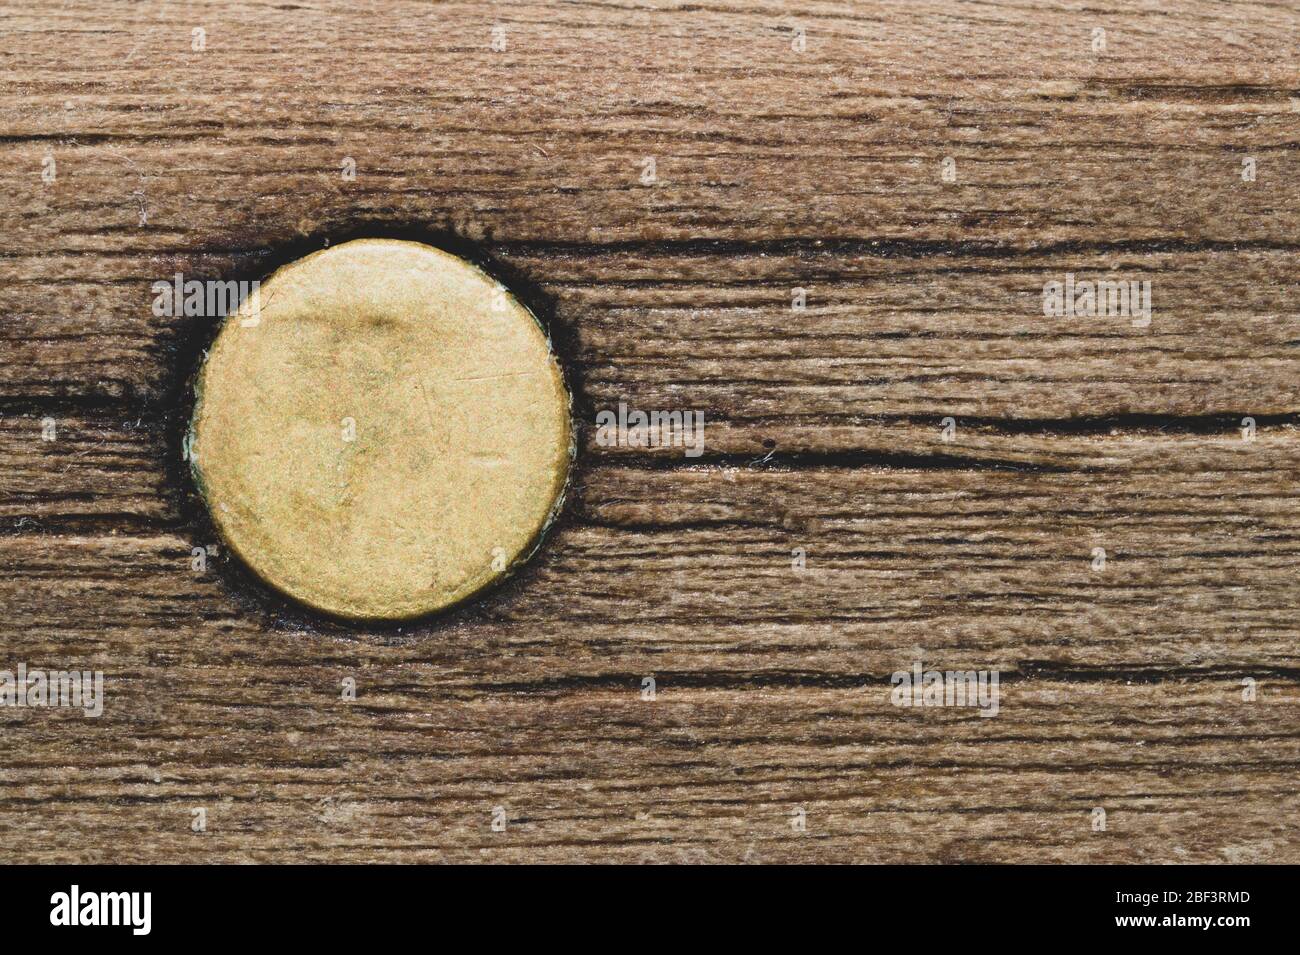 Old wooden background with a dowel. wood texture with a metal pin Stock Photo